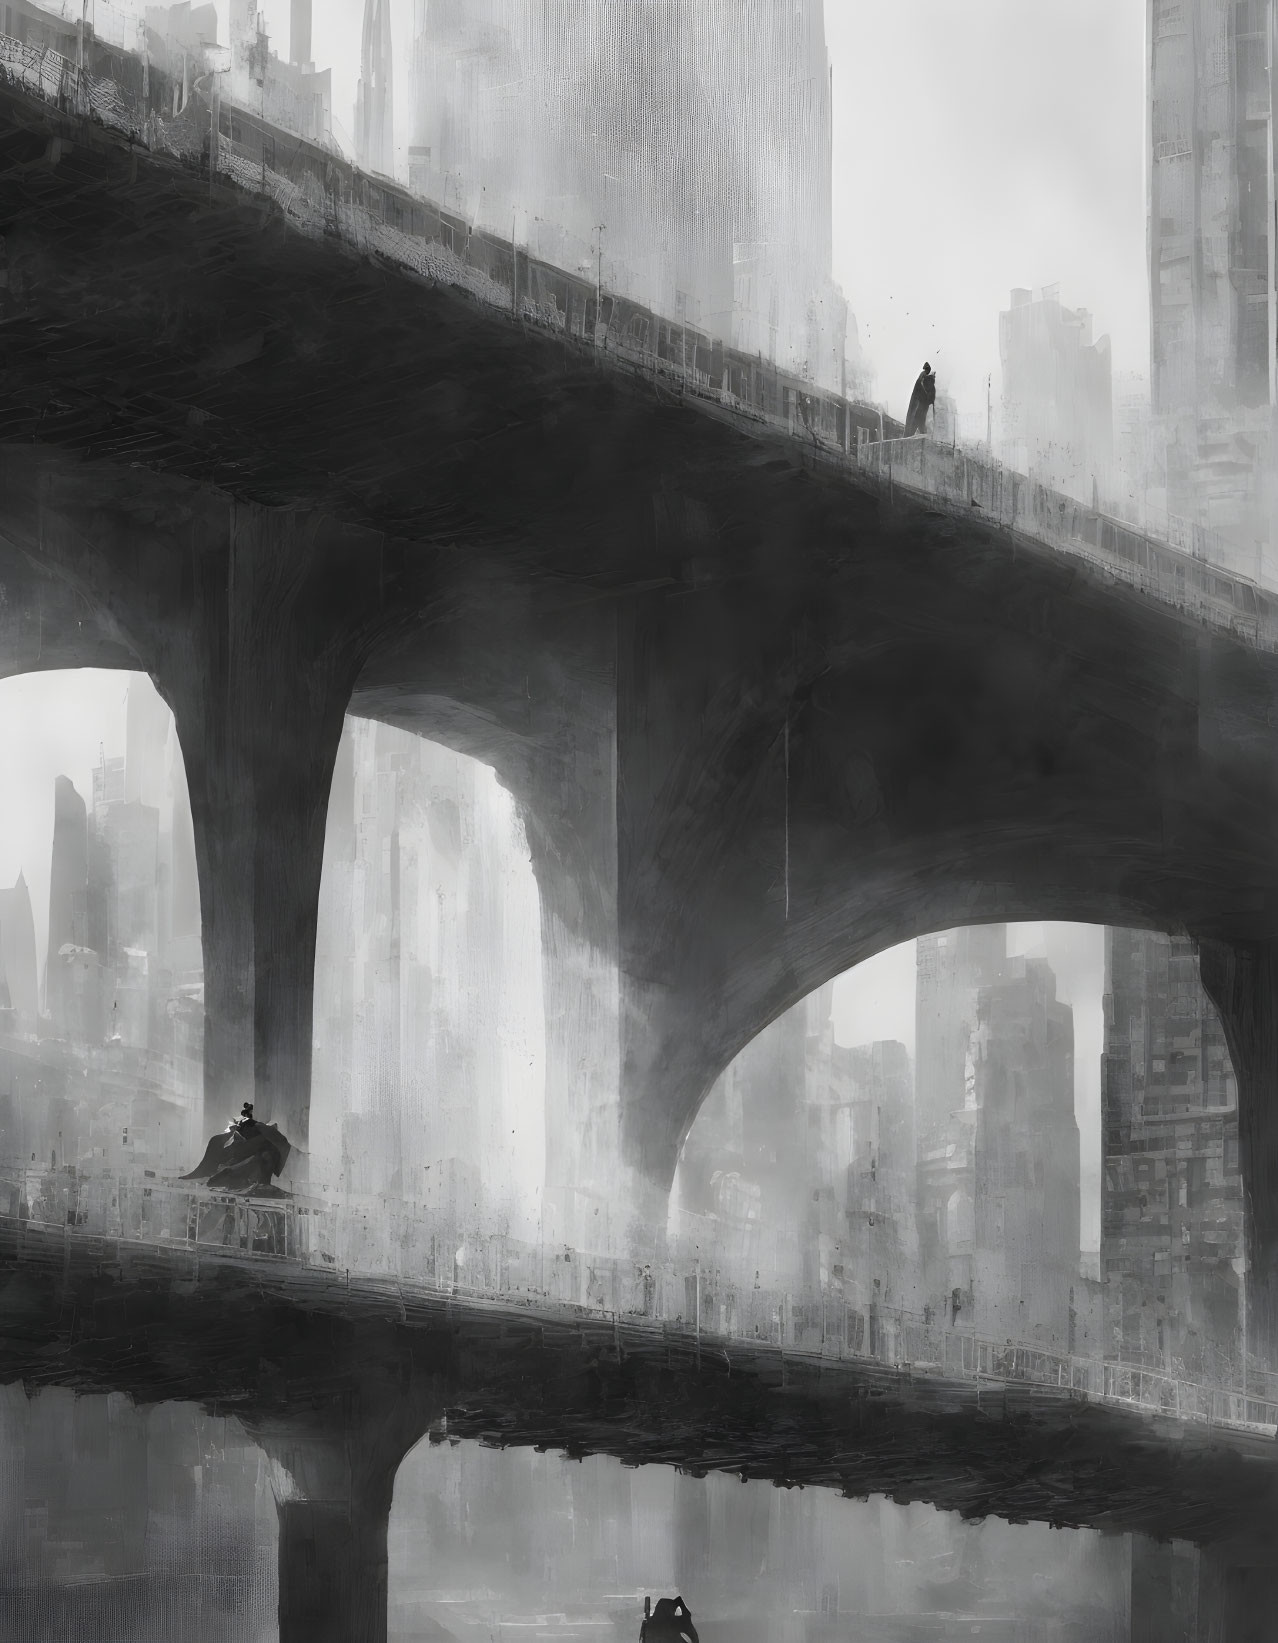 Monochromatic dystopian cityscape with bridges and isolated figures